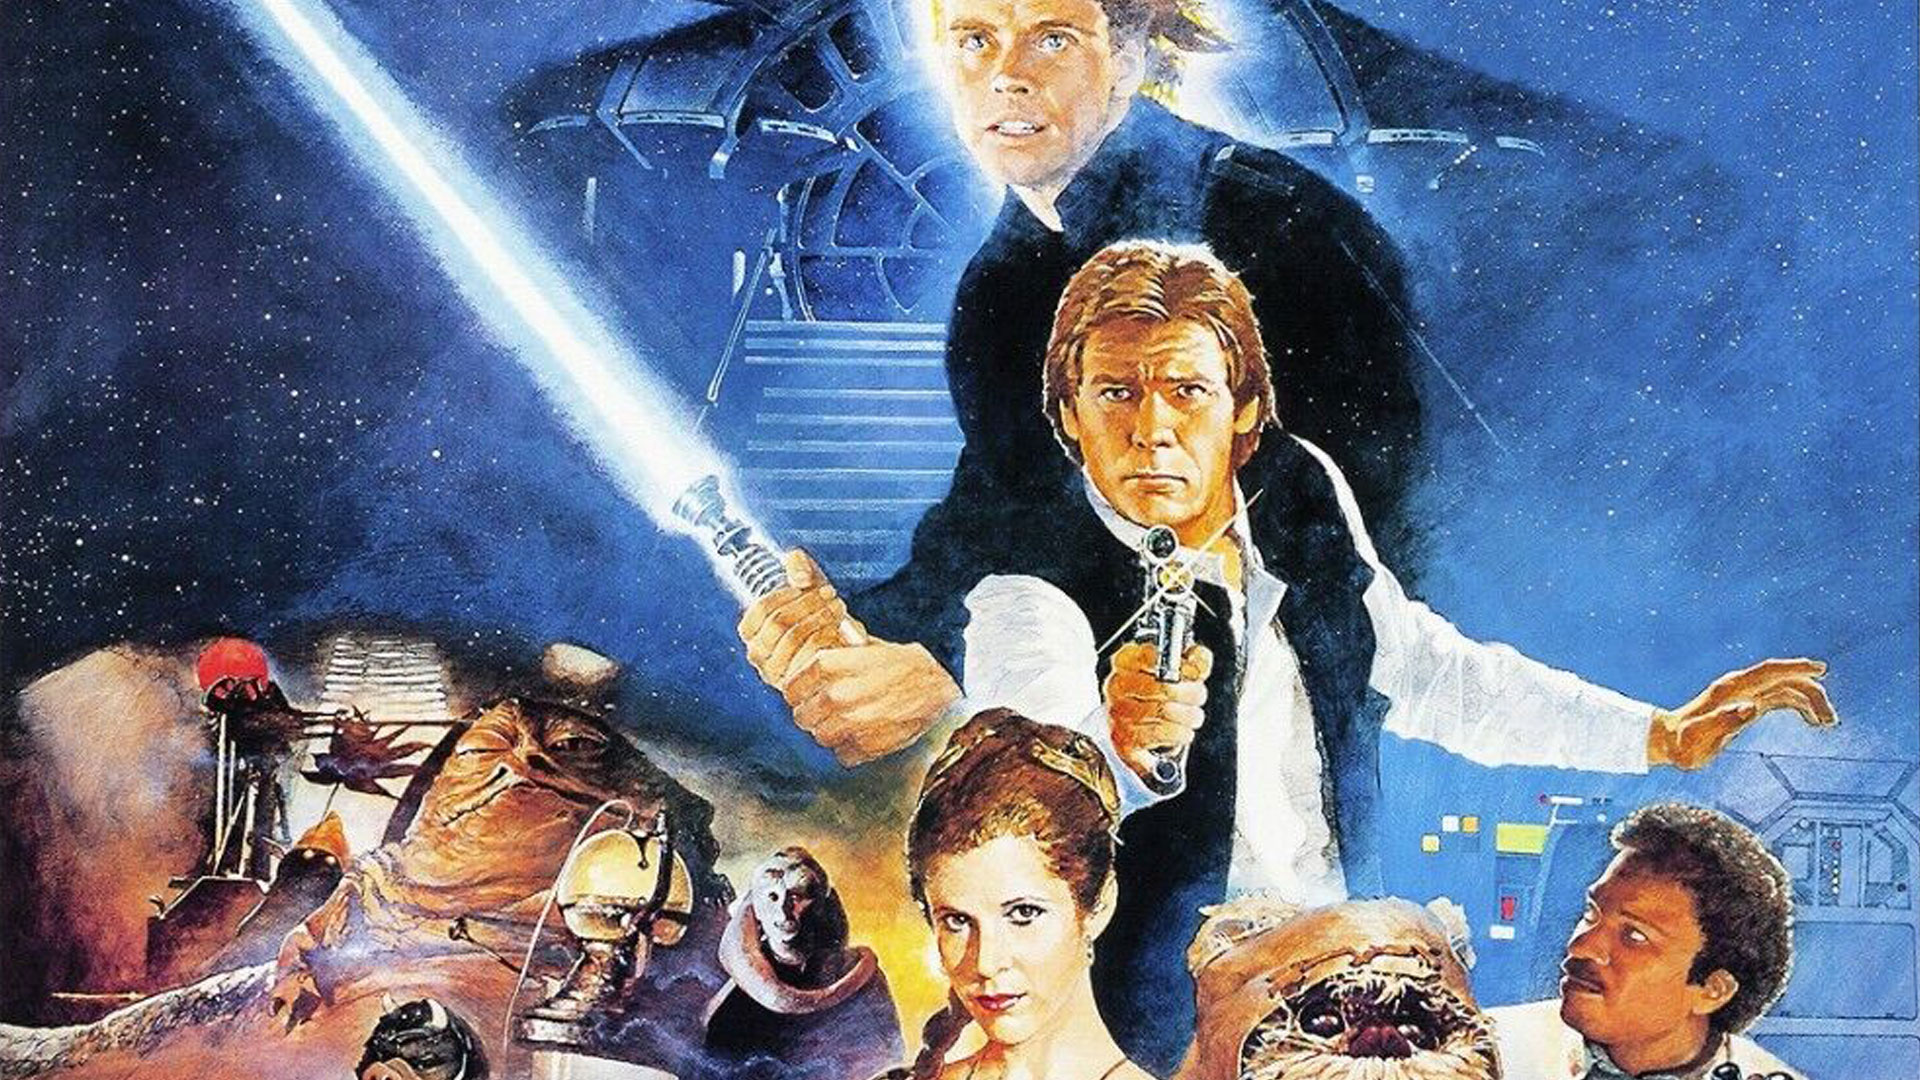 May the 4th Return of the Jedi